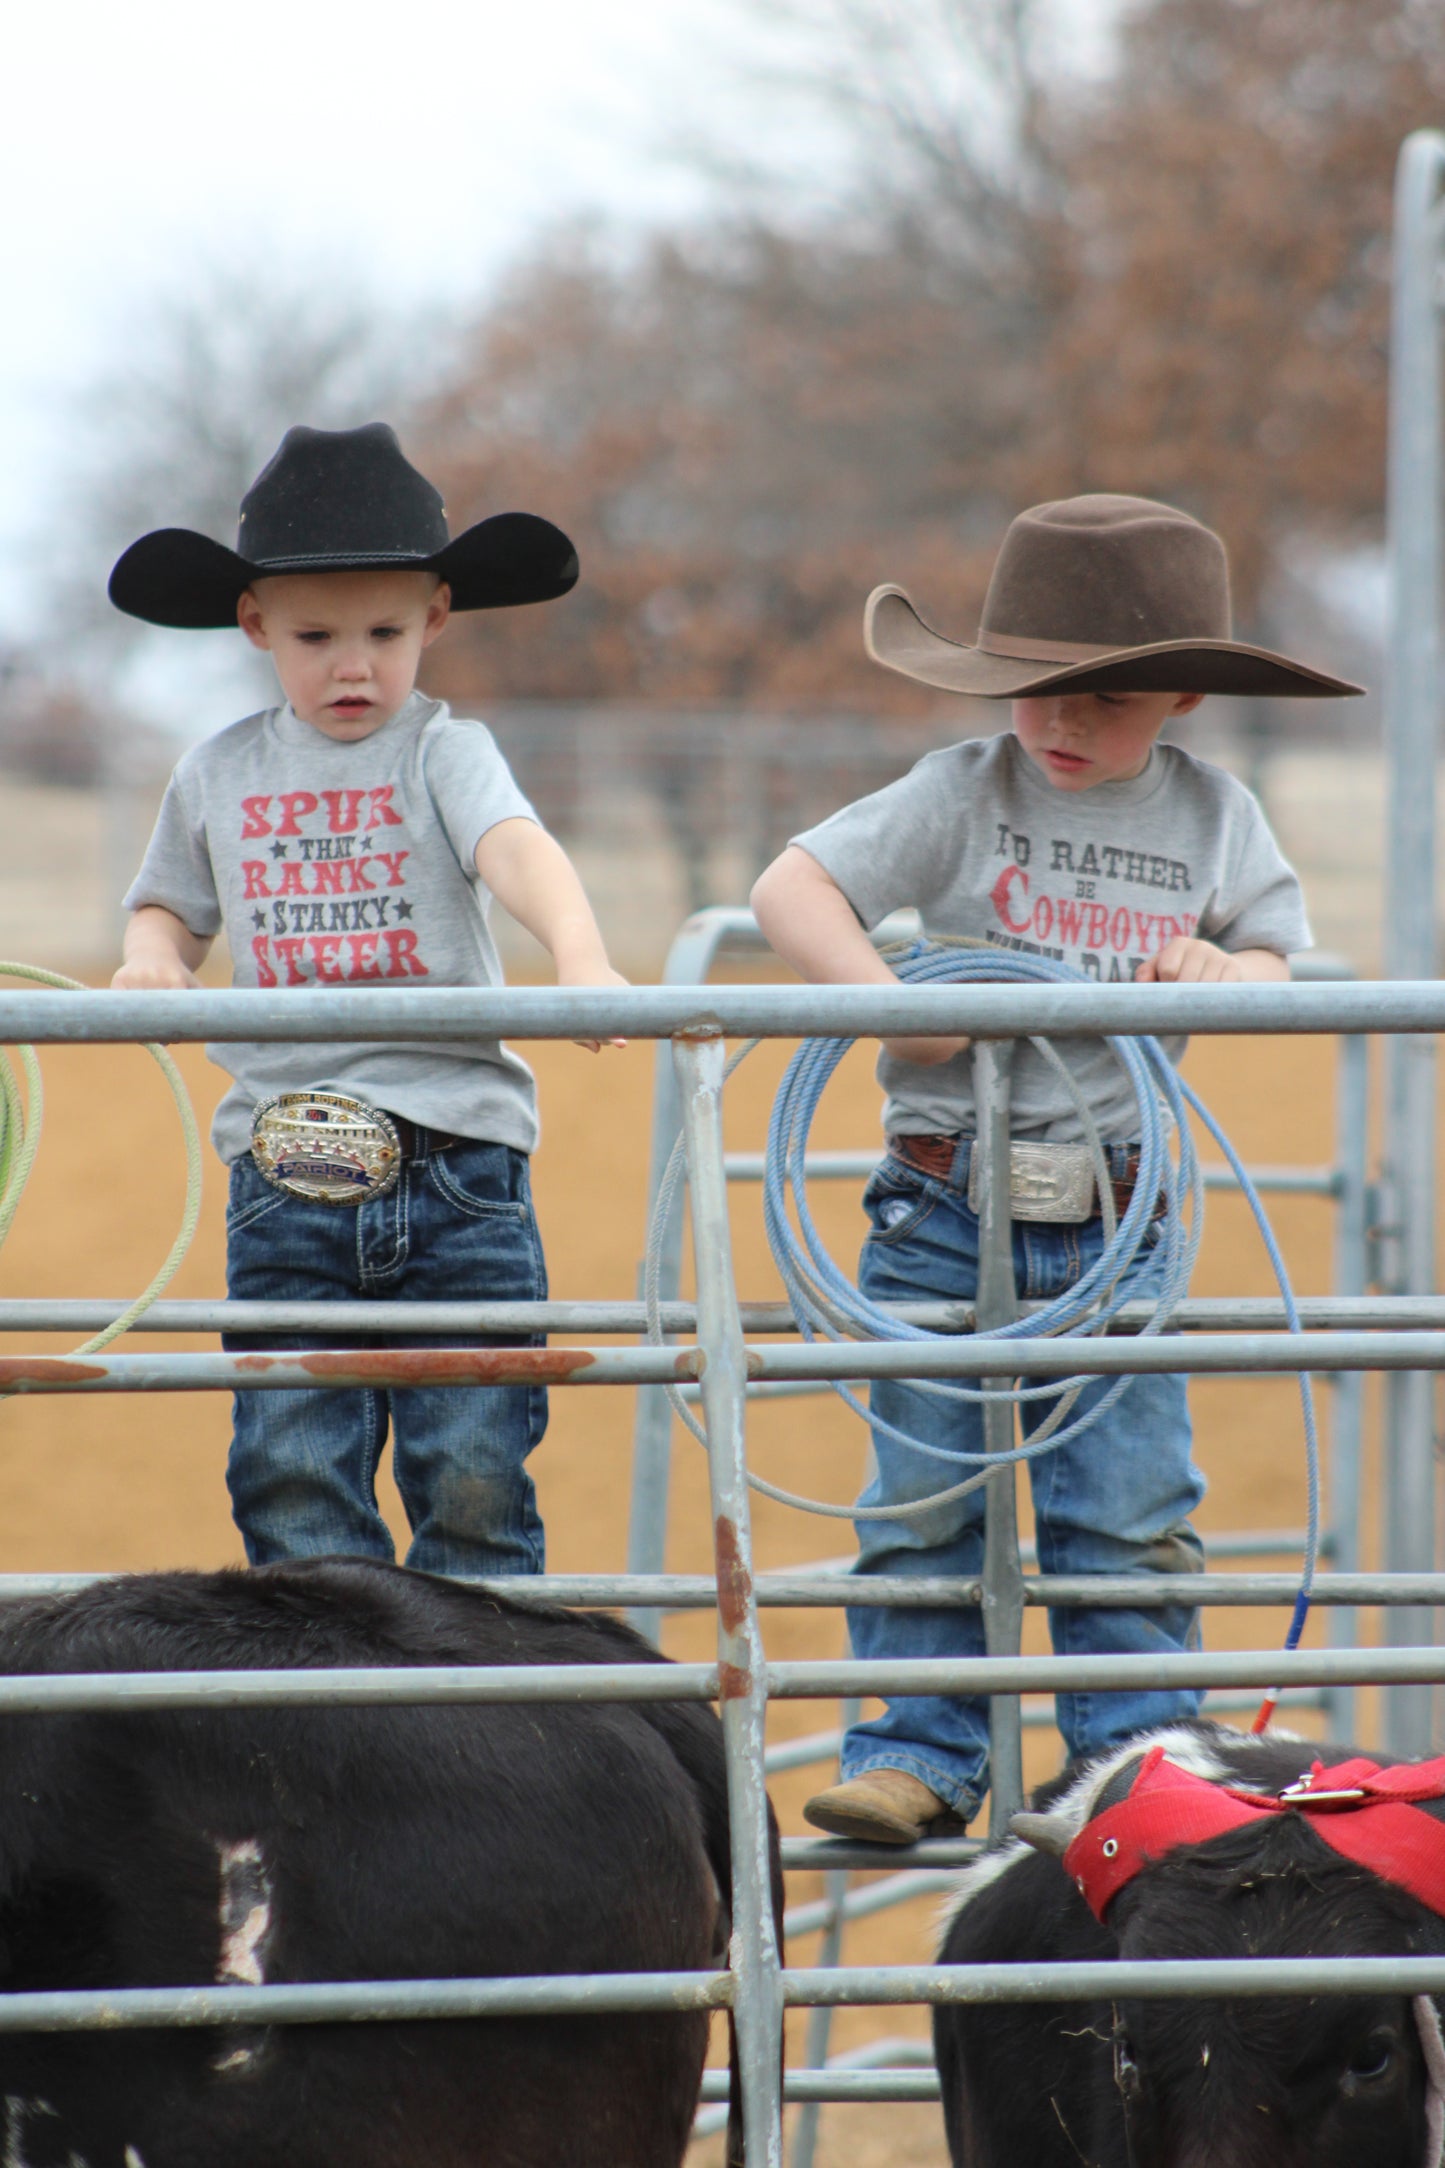 I'd Rather Be Cowboyin' With Daddy  - S/S Toddler Tee - Gray